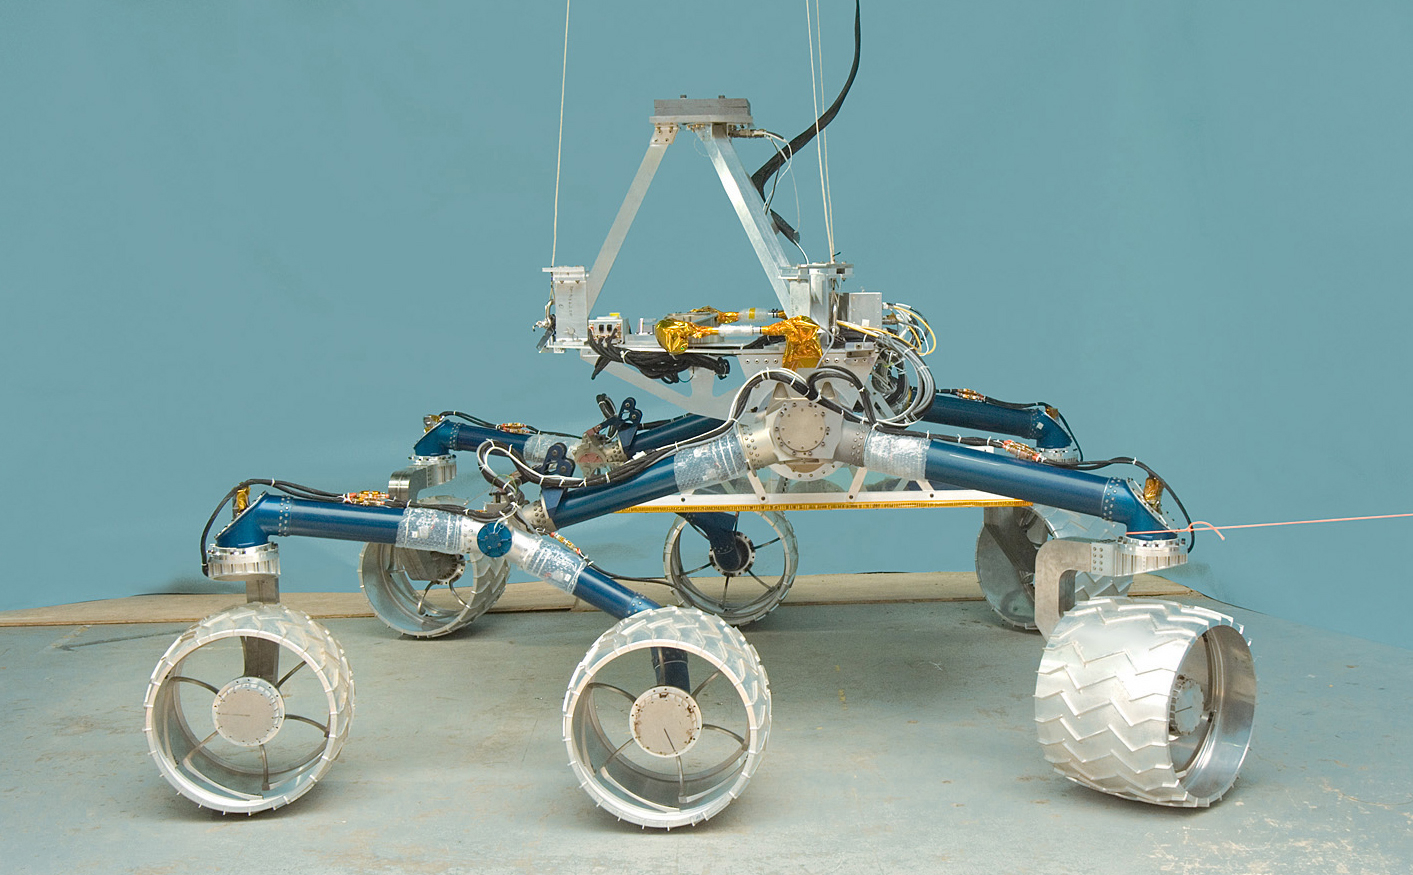 In this image, a large, six-wheeled rover sits on a concrete floor in a laboratory against a light-blue background.  The rover's 'legs,' or mobility system are a medium blue color and the large, cleated wheels are shiny silver.  On top of the mobility system is a silver-colored triangle that represents where the heart and brains of the rover will go when it is complete.